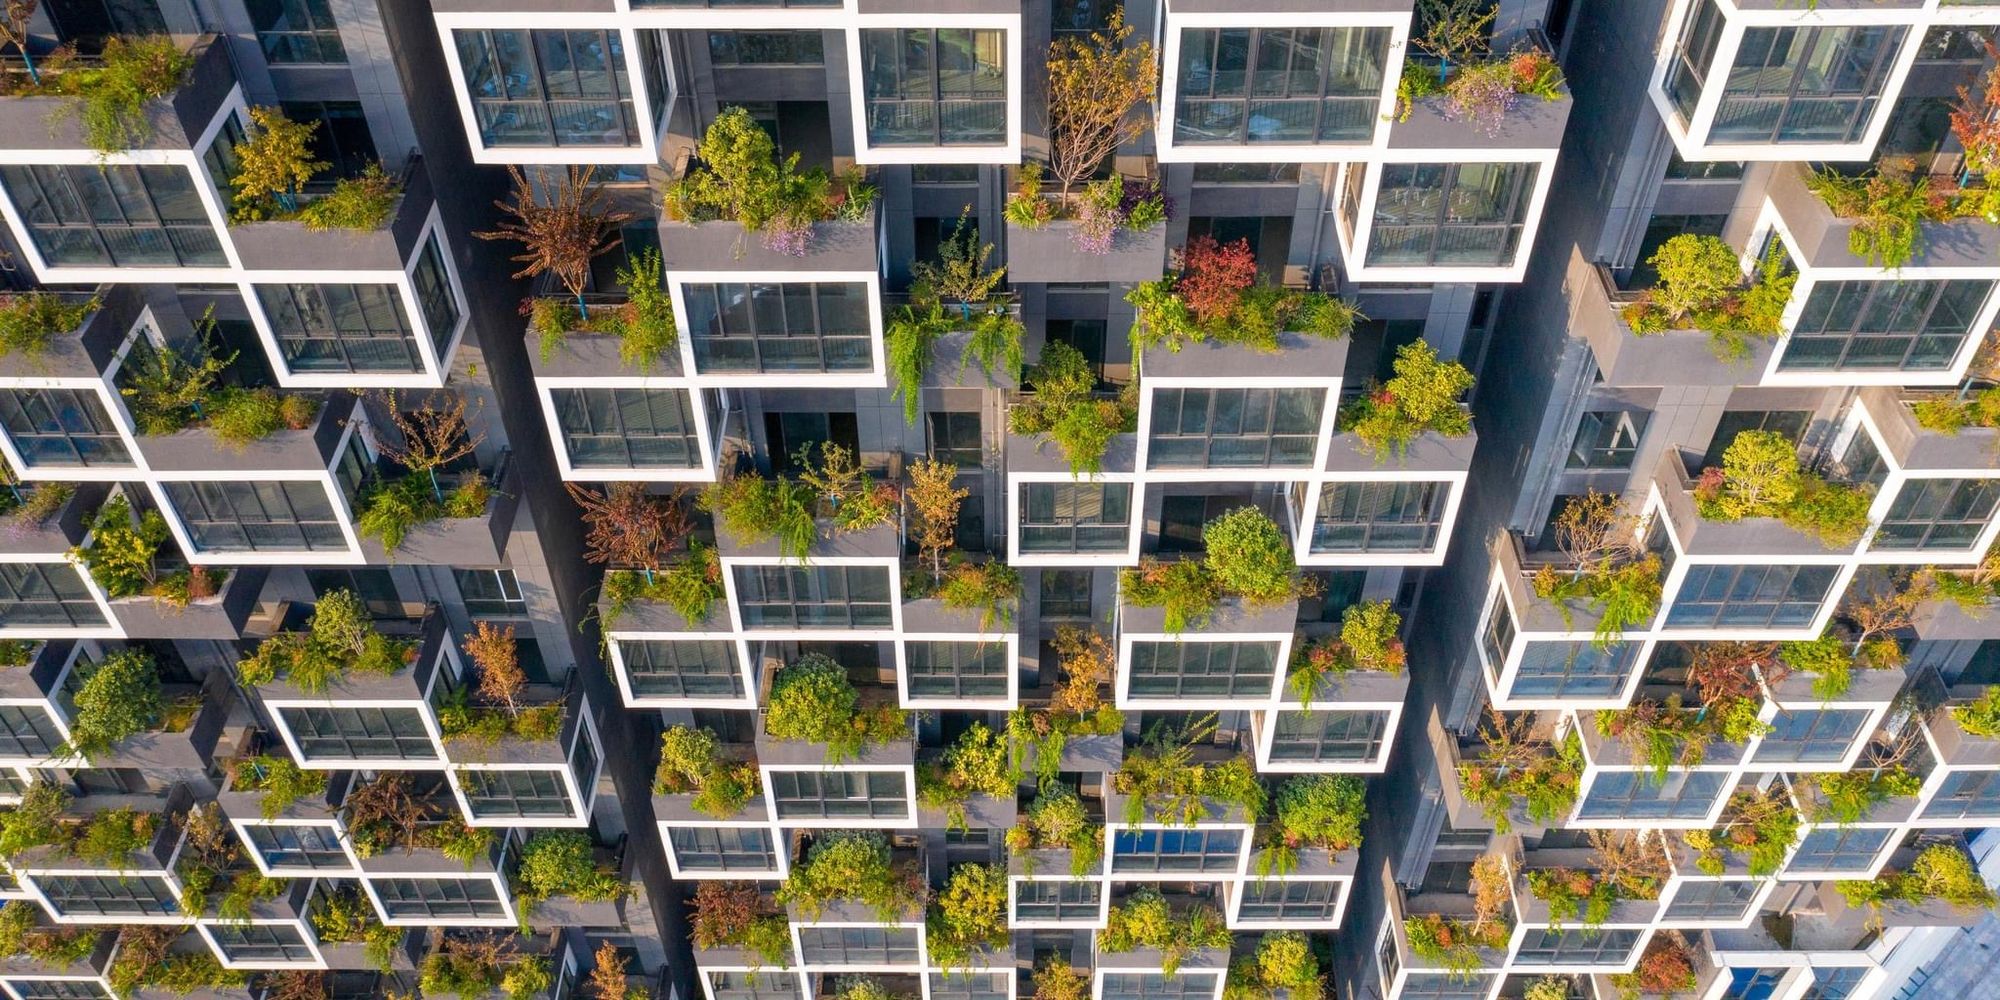 New Chinese Vertical Forest Has Come To Life.